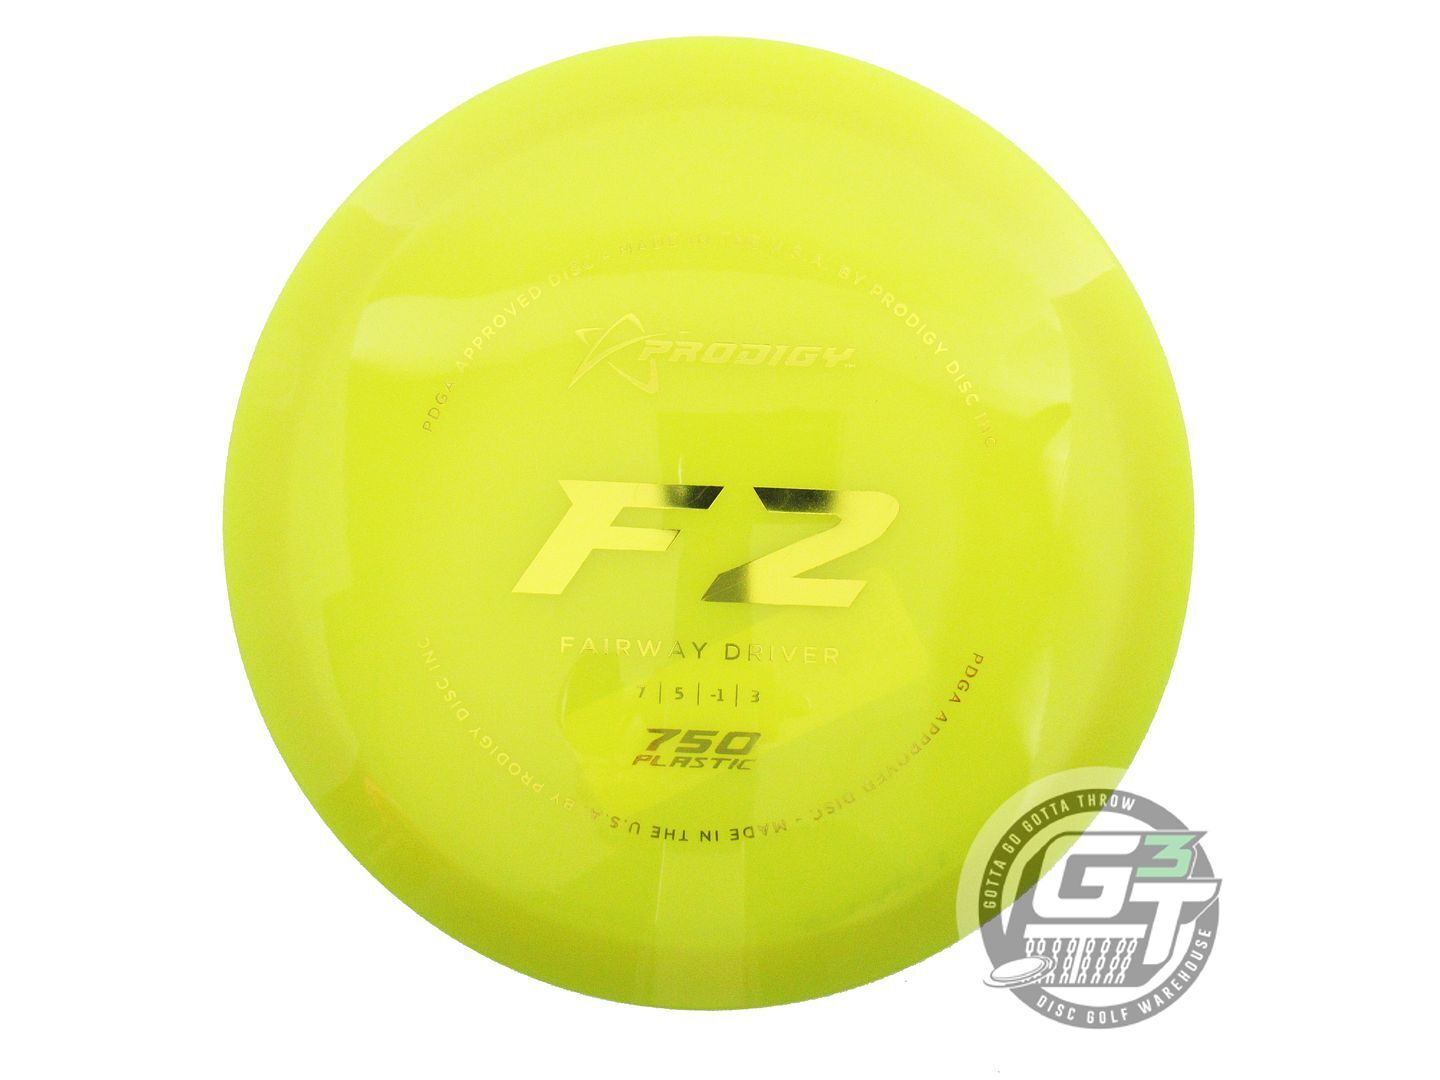 Prodigy 750 Series F2 Fairway Driver Golf Disc (Individually Listed)